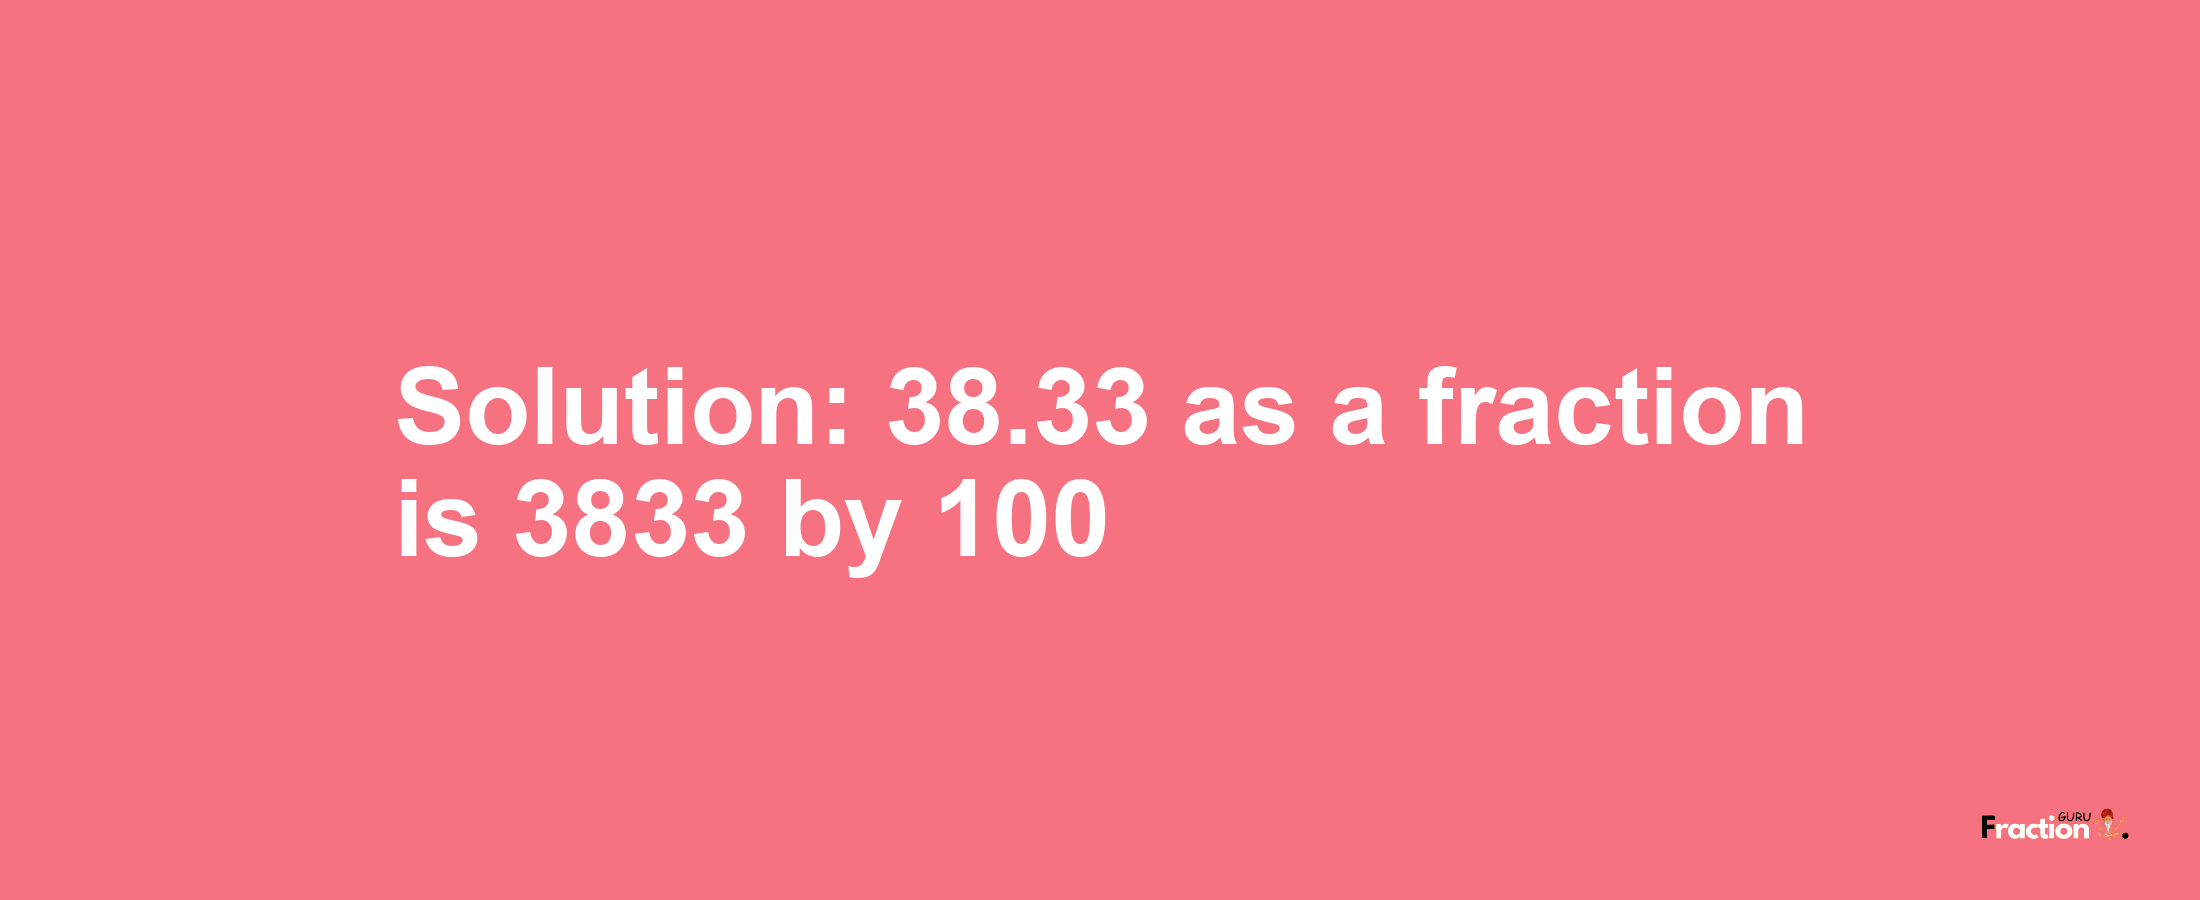 Solution:38.33 as a fraction is 3833/100